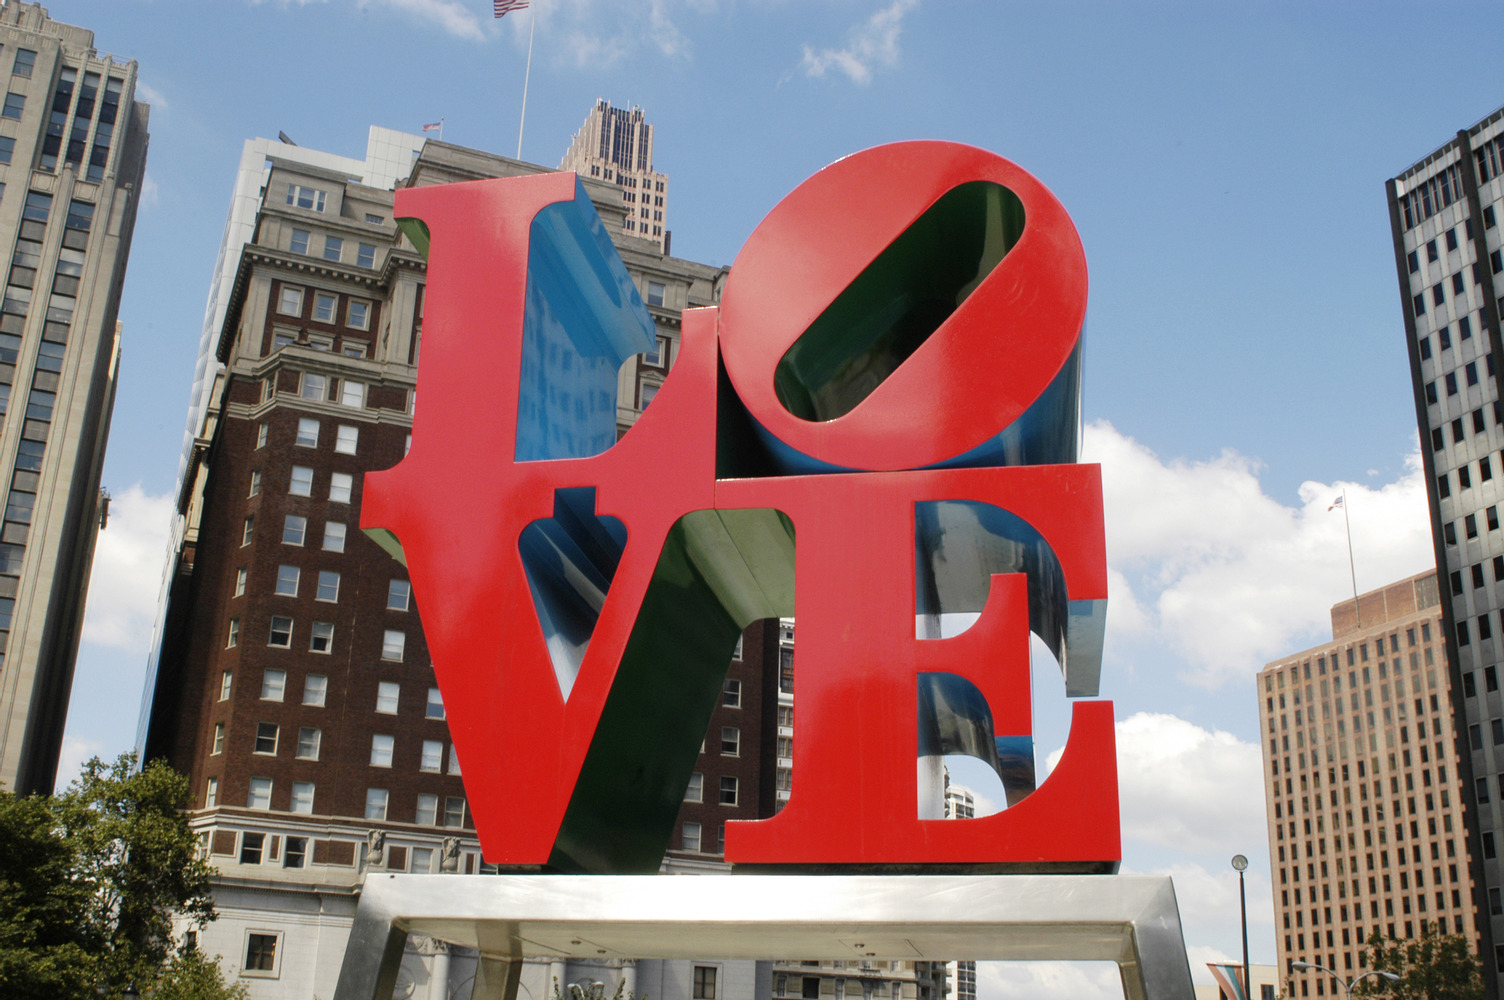 An iconic landmark, the LOVE sculpture is one of the most photographed places in Philadelphia. Courtesy of the Philadelphia Convention and Visitors Bureau